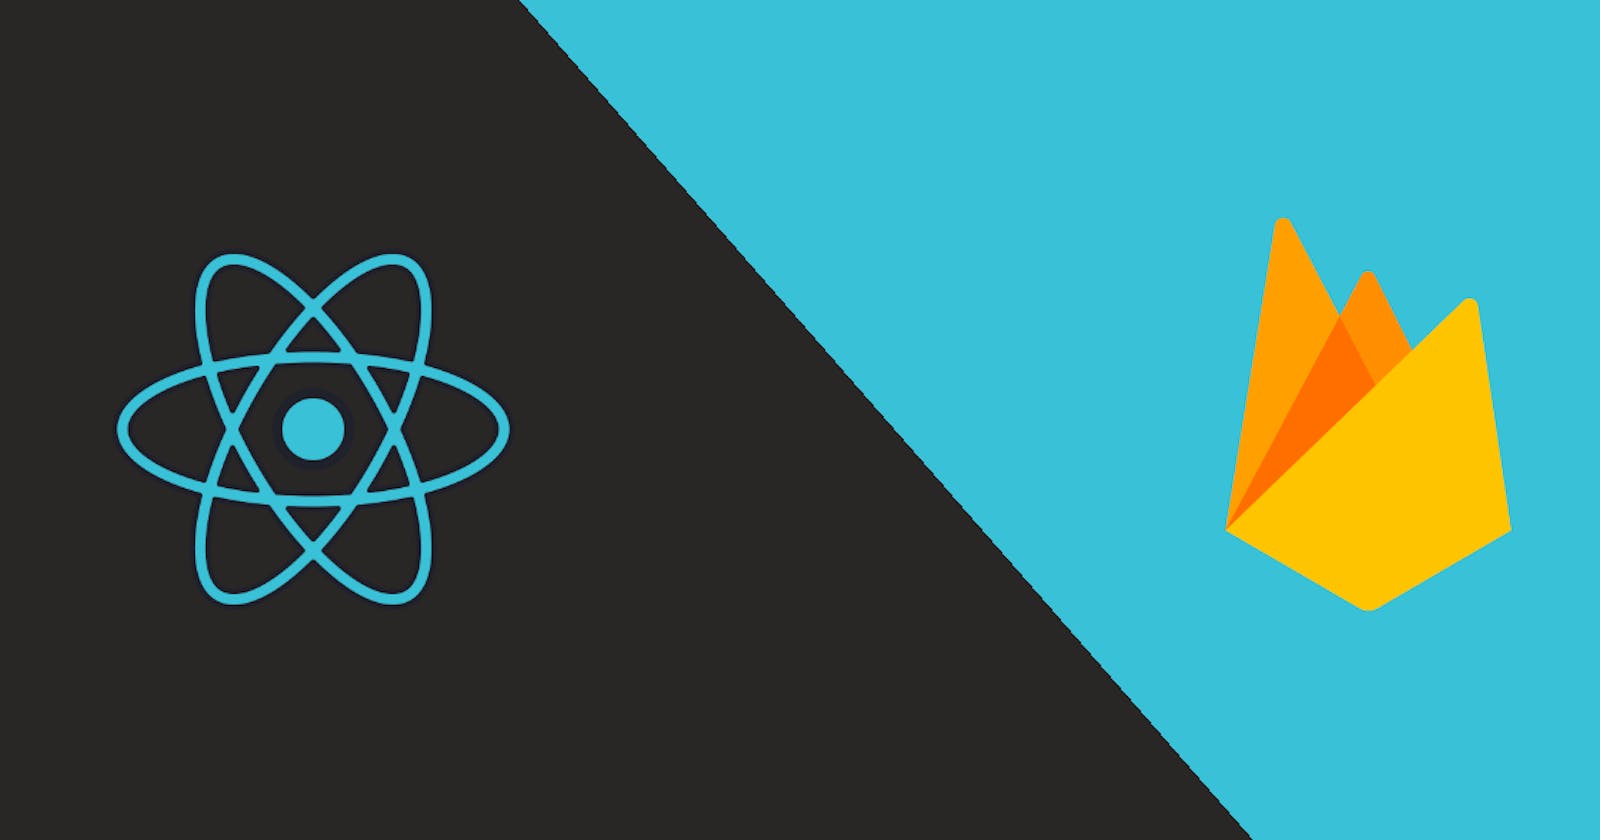 Beginner's guide to setup Firebase with React app.